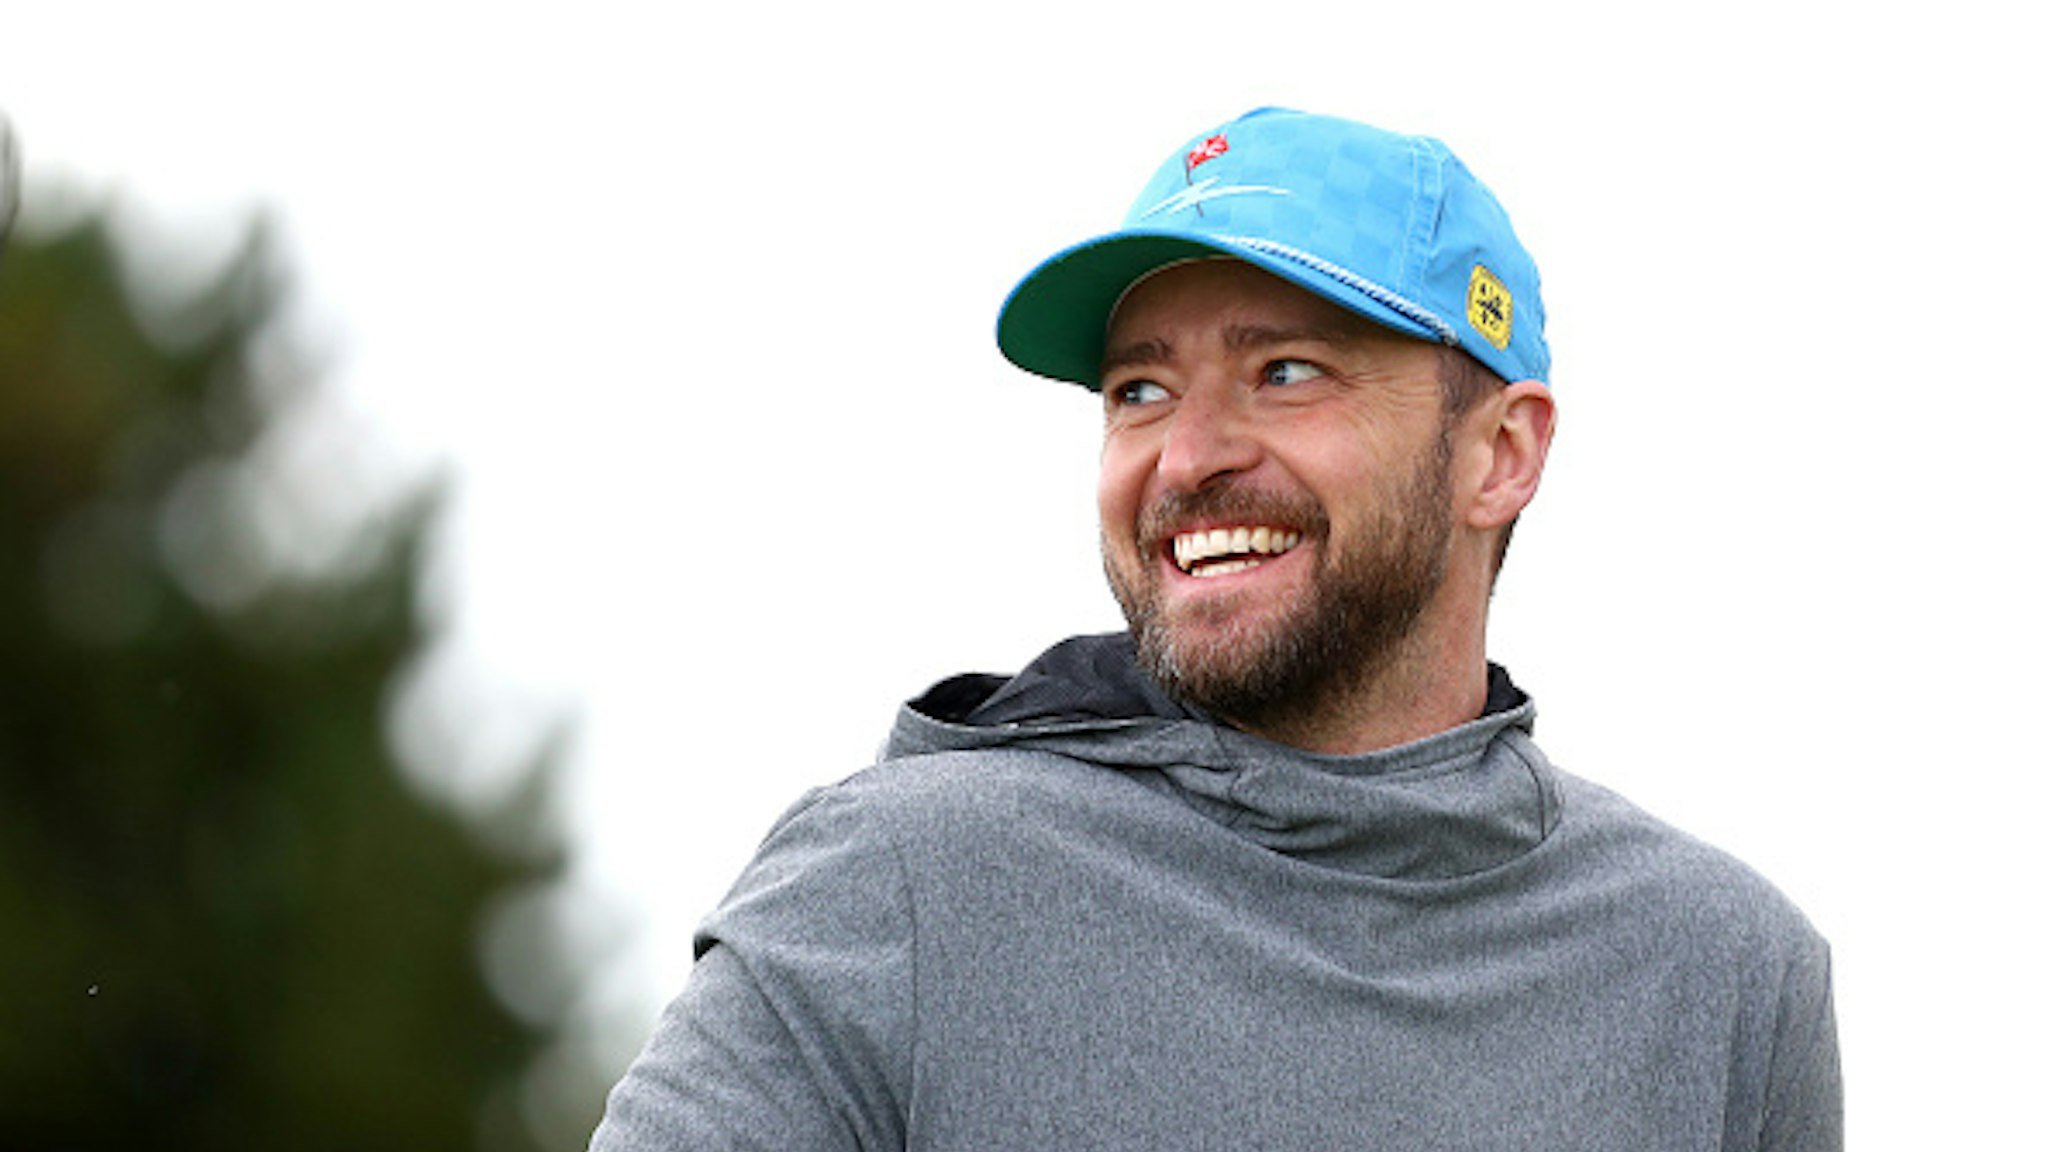 Musician, Justin Timberlake reacts during Day one of the Alfred Dunhill Links Championship at Carnoustie Golf Links on September 26, 2019 in St Andrews, United Kingdom.